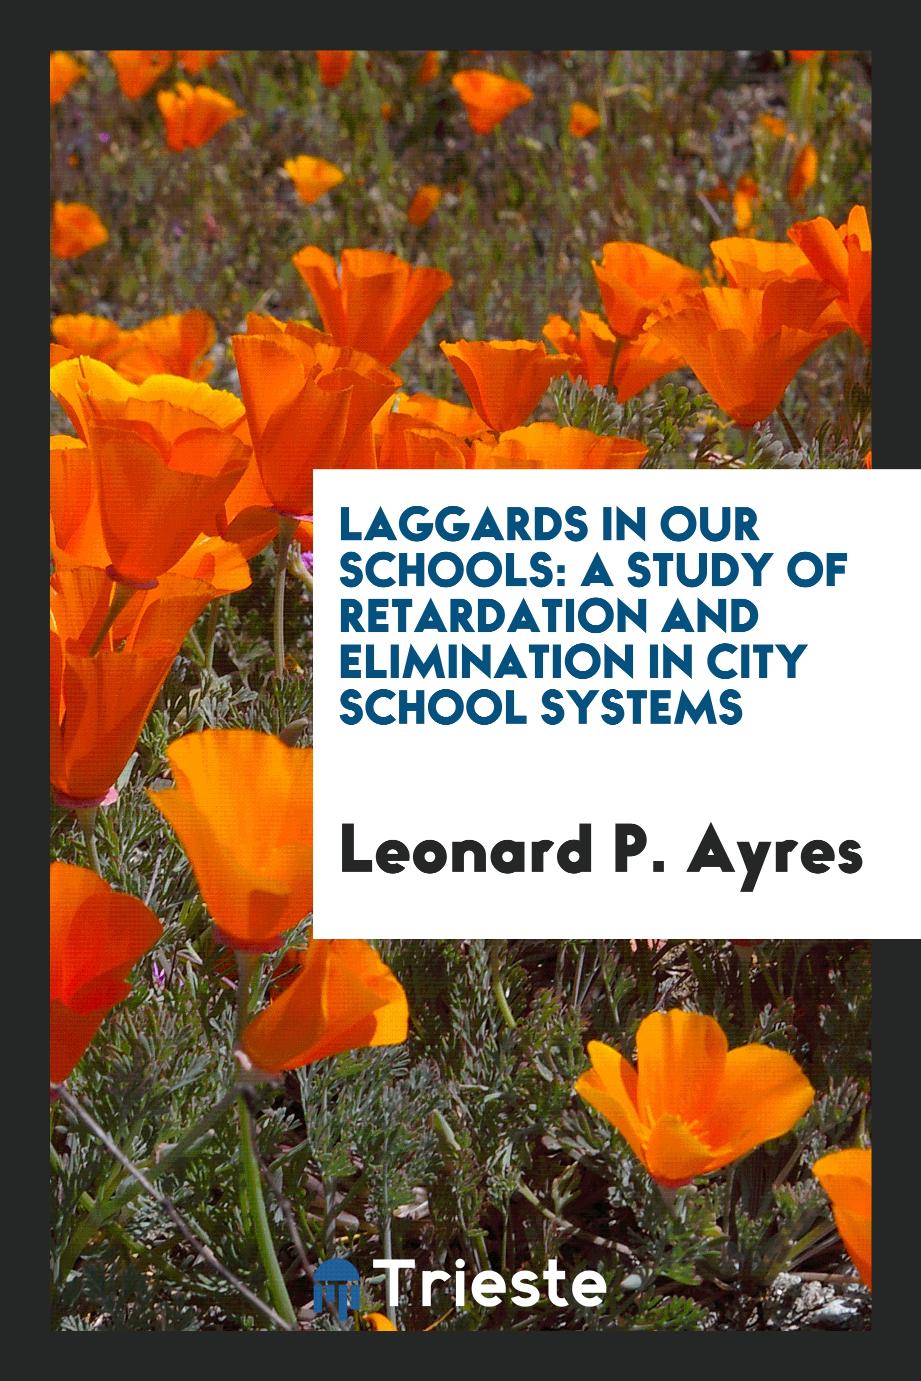 Laggards in Our Schools: A Study of Retardation and Elimination in City School Systems